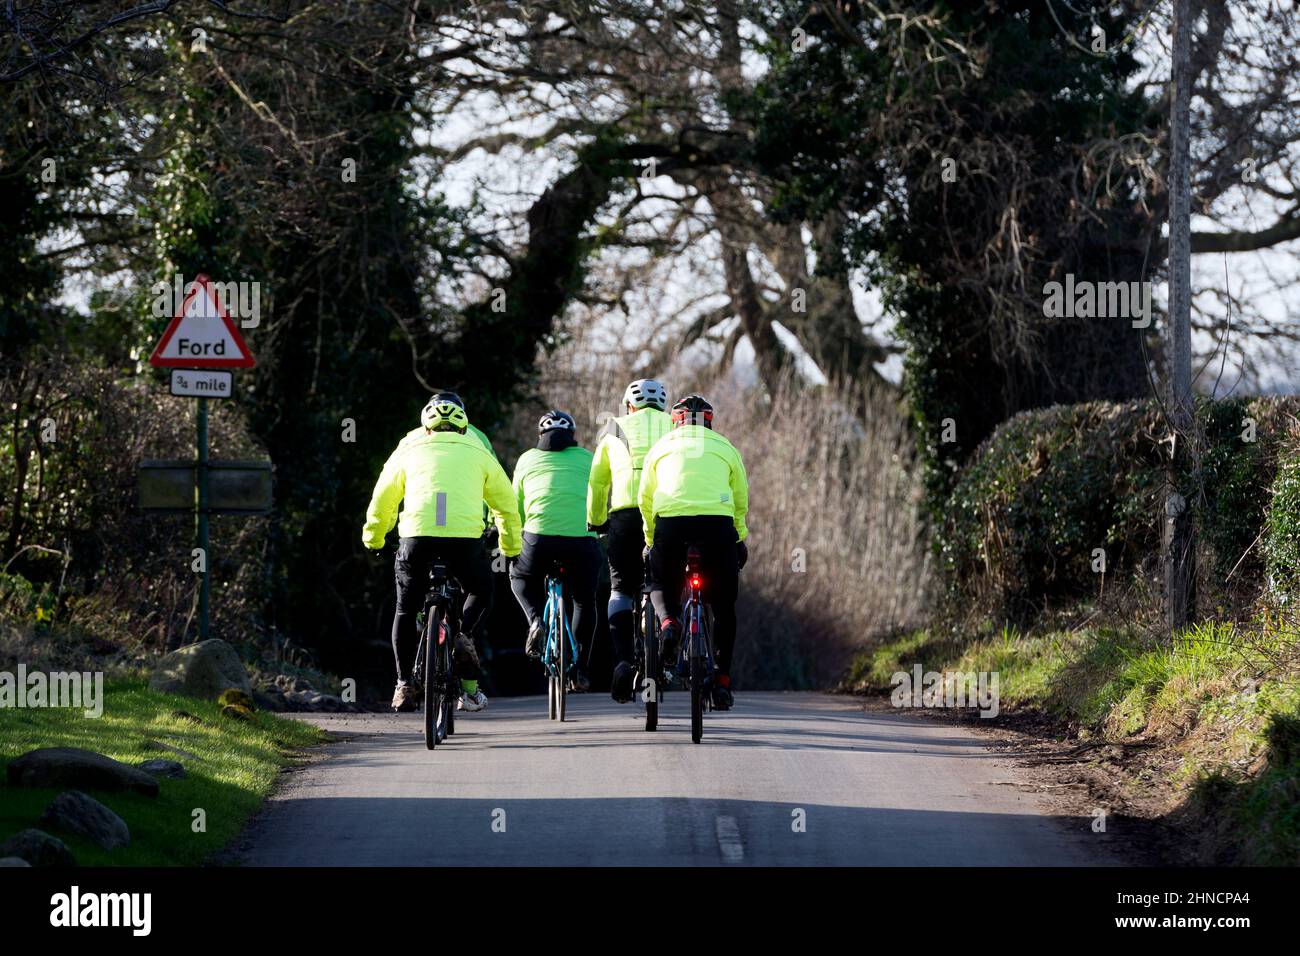 A group of cyclists in Barston village, West Midlands, England, UK Stock Photo